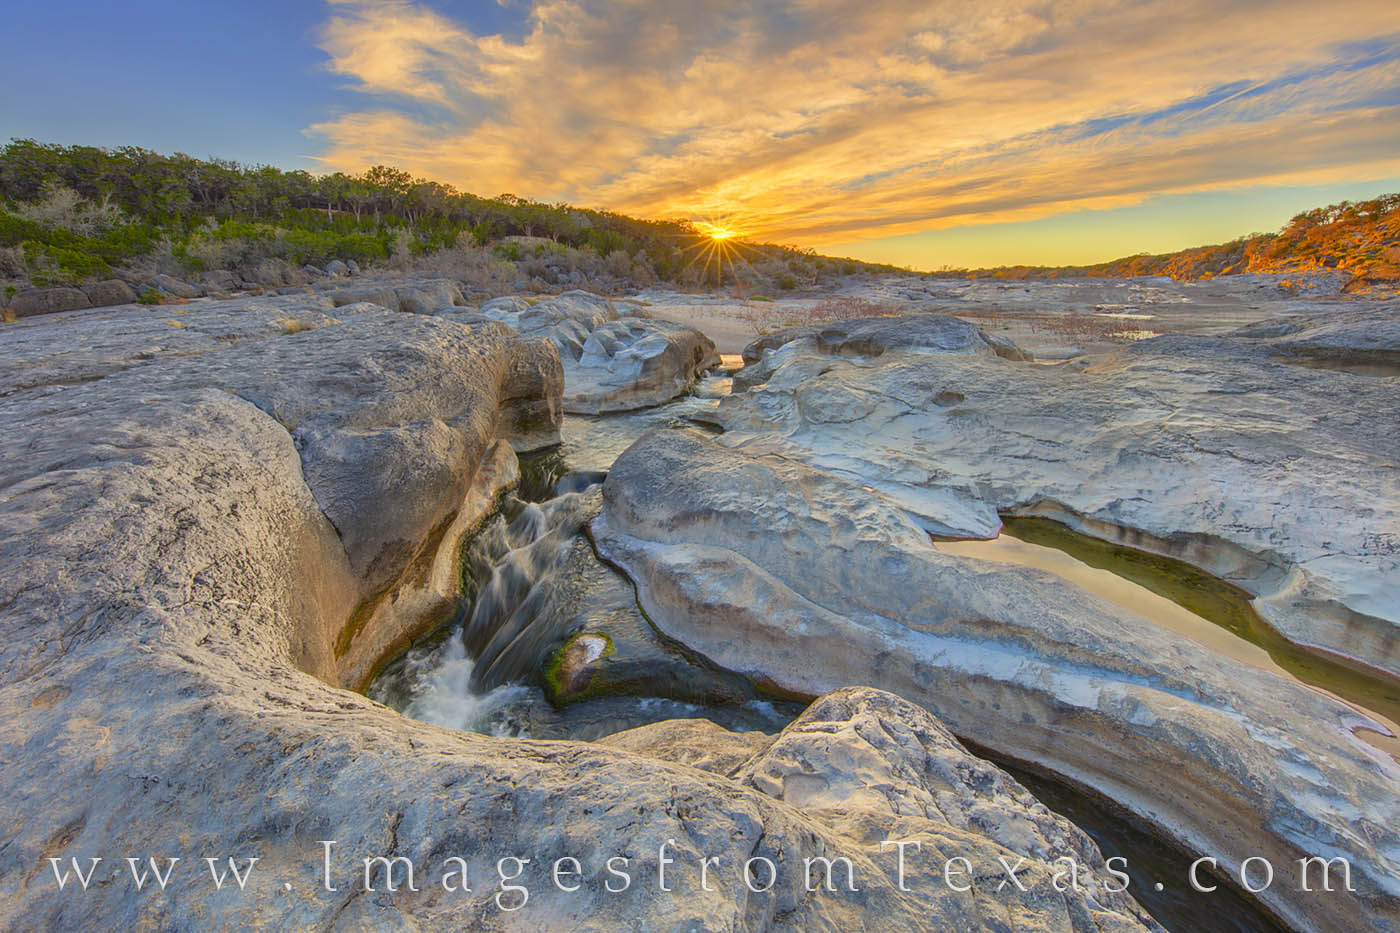 hill country, pedernales river, state park, hill country prints, pedernales falls prints, texas hill country, sunburst, spring